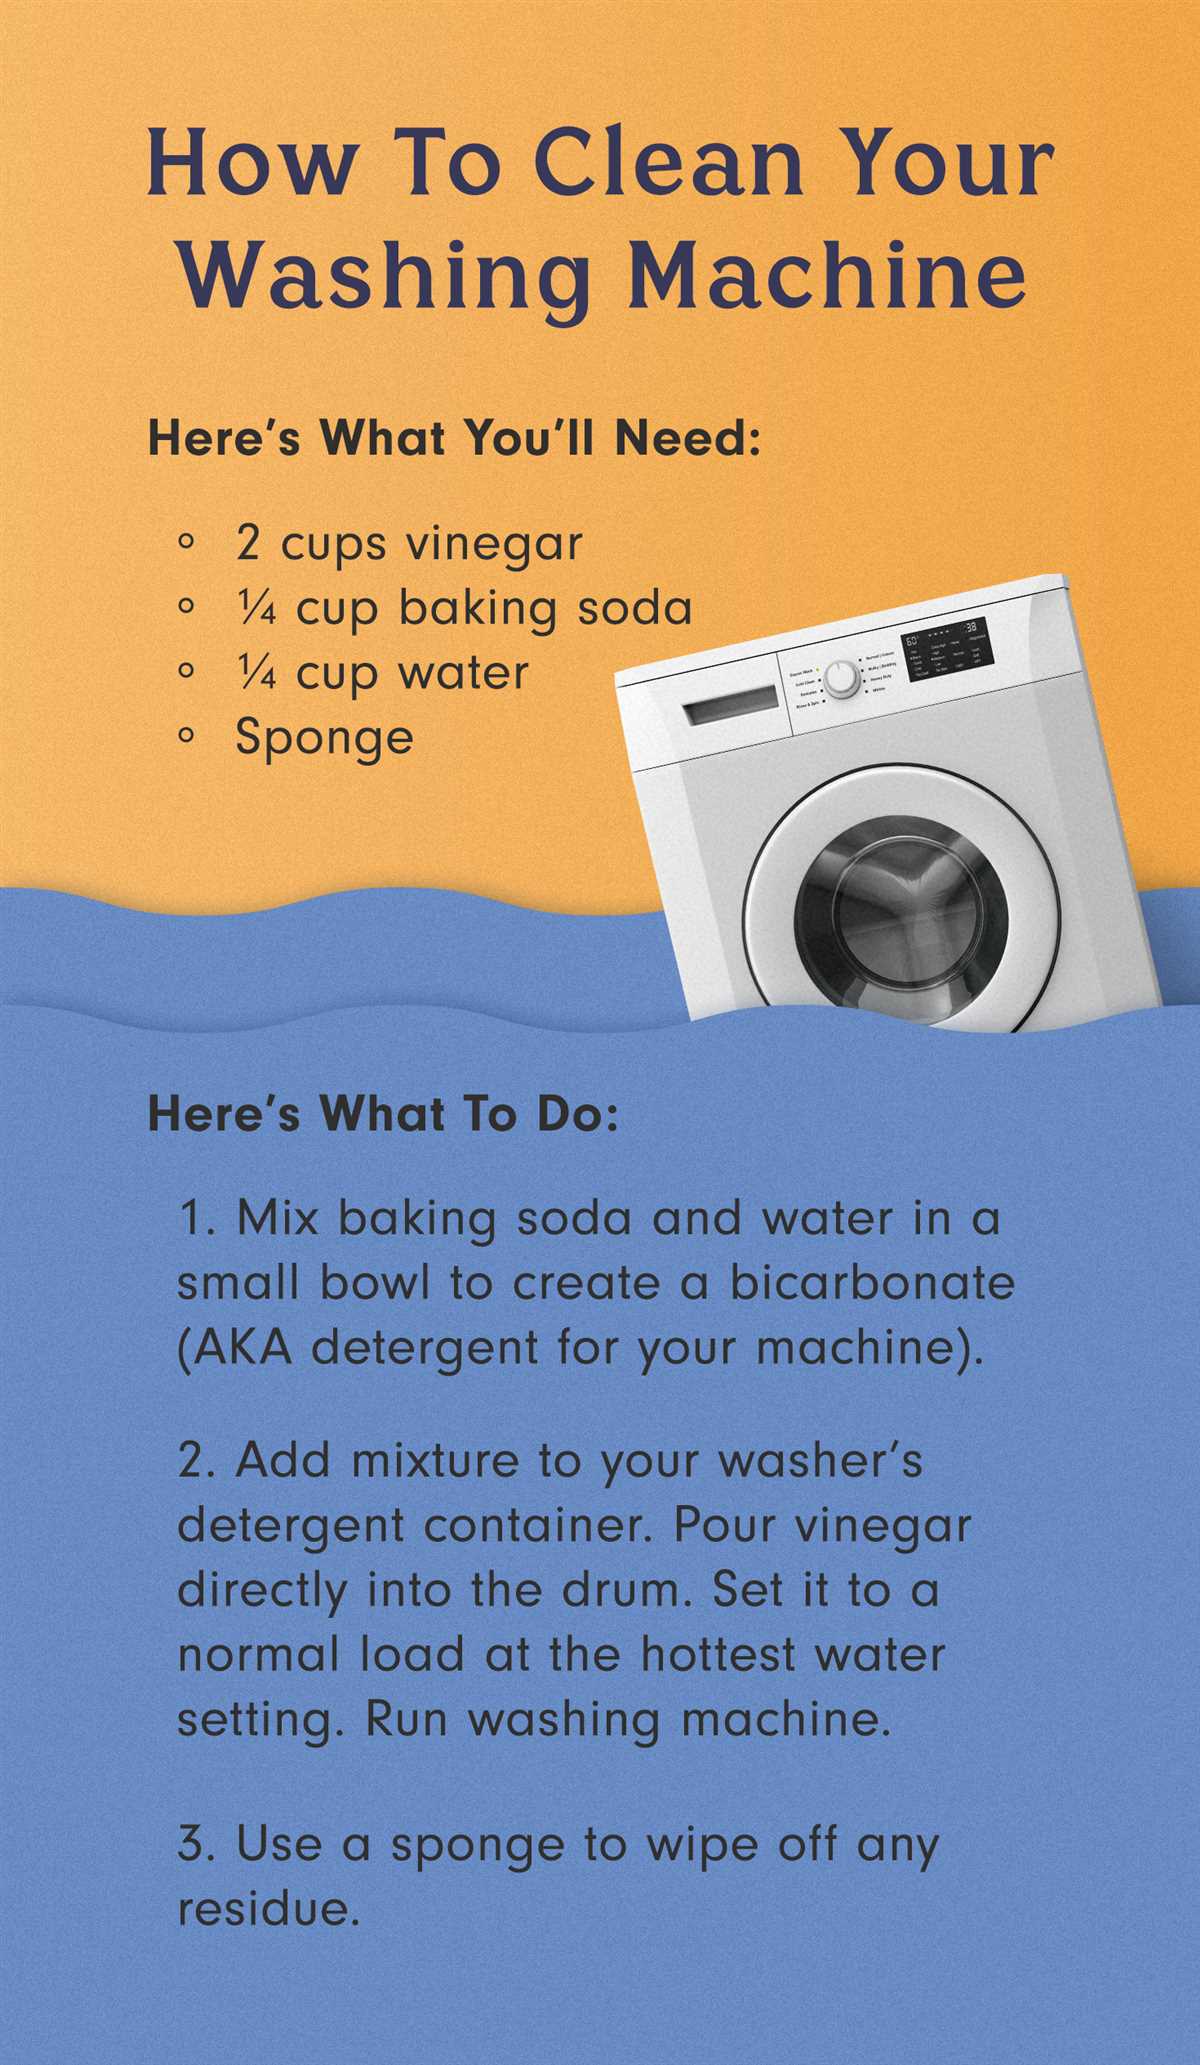 Expert Tips for Maintaining a Clean Washing Machine